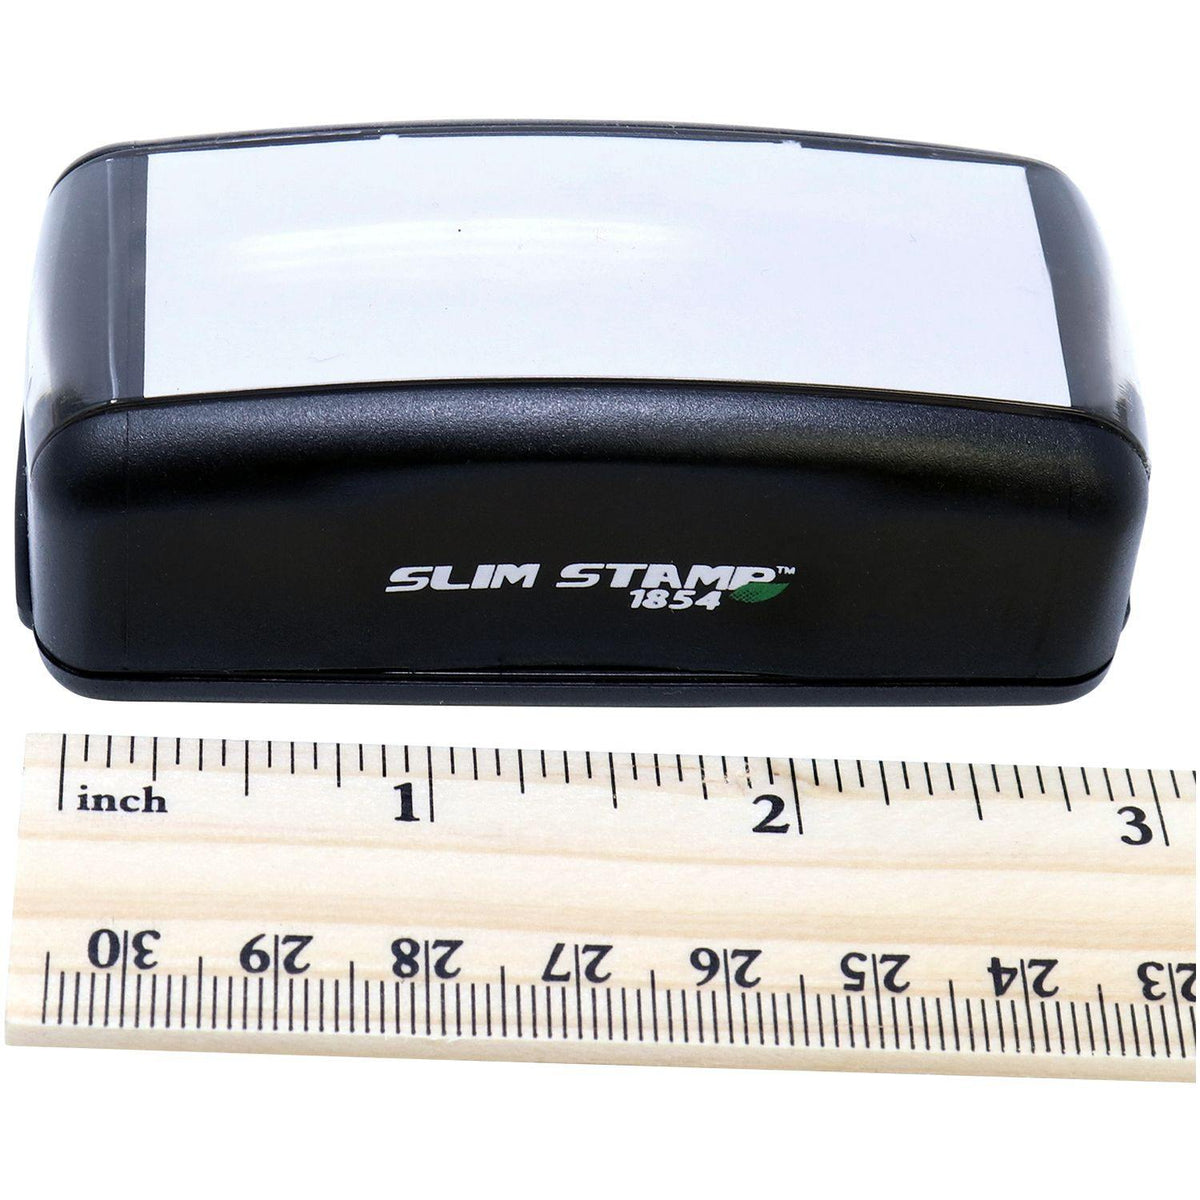 Measurement Large Pre-Inked For Official Use Only Stamp with Ruler